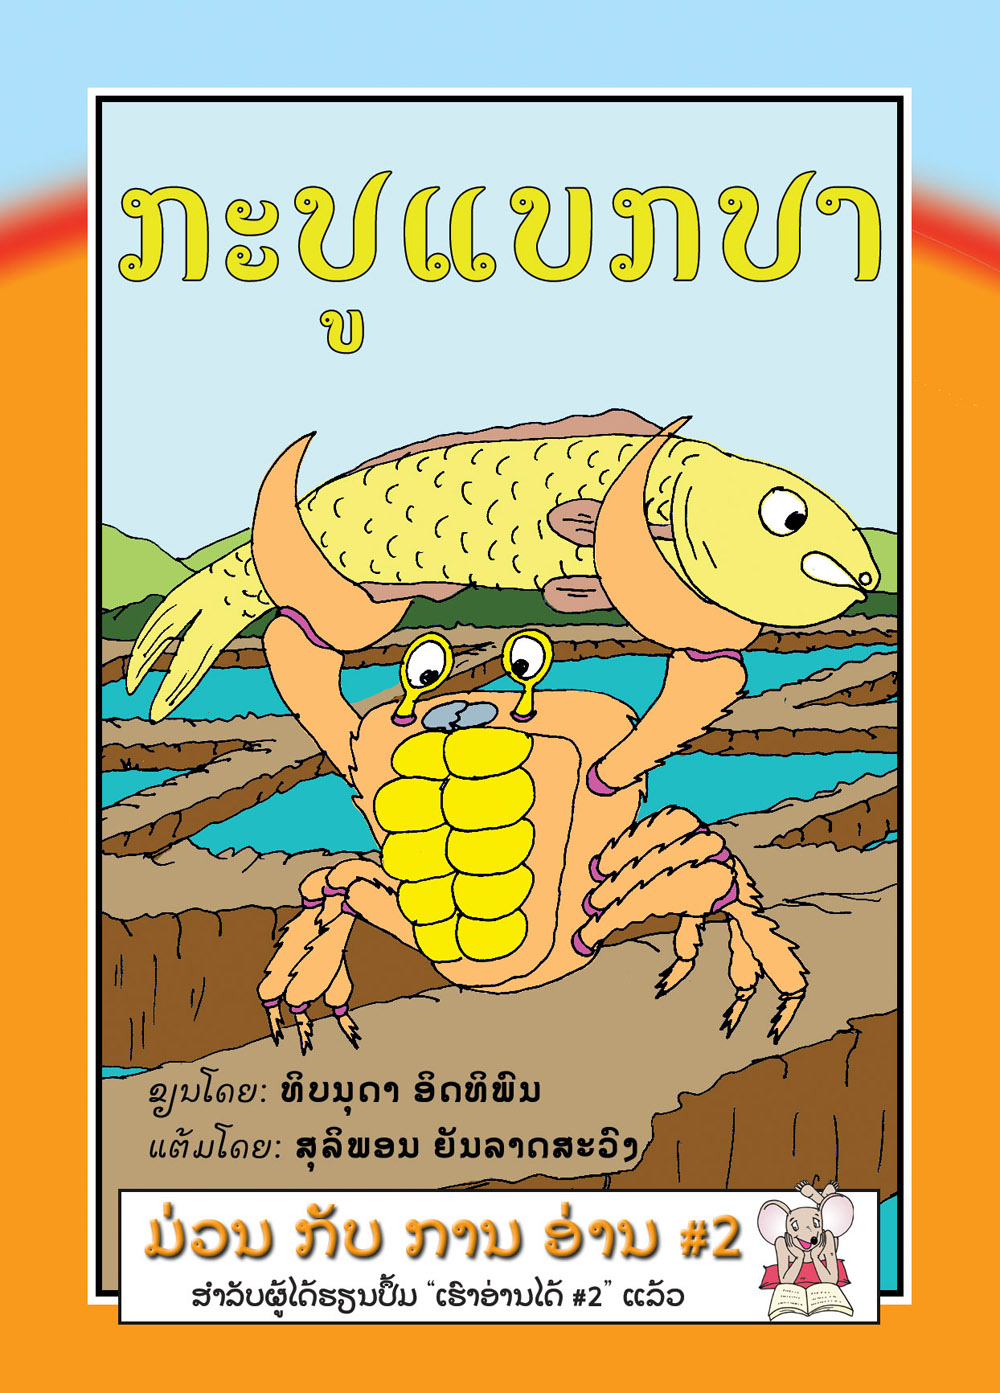 The Crab Carries the Fish large book cover, published in Lao language